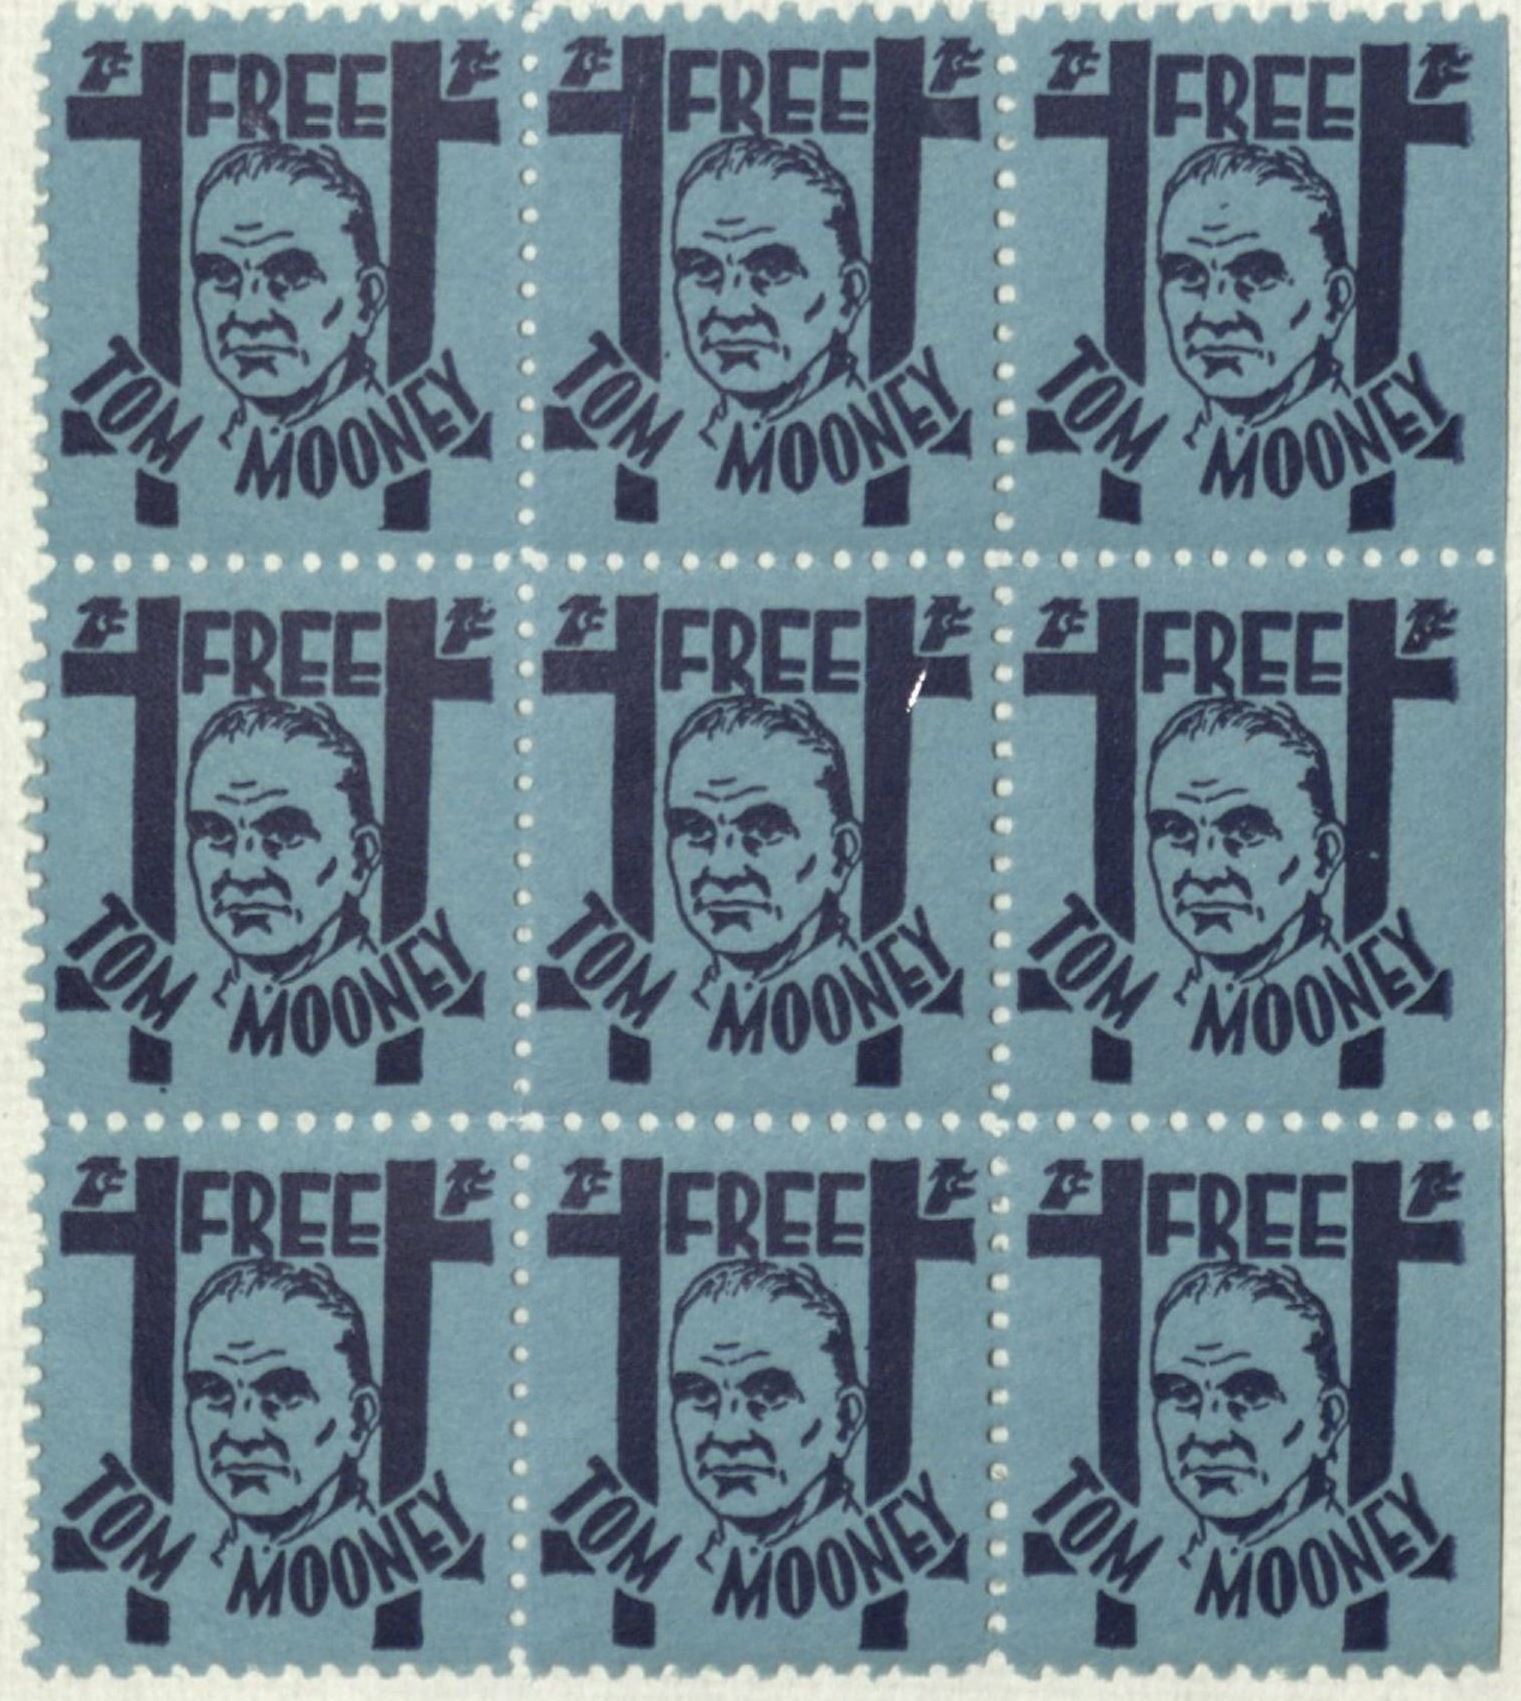 Protest stamps for Mooney, 1920–30s